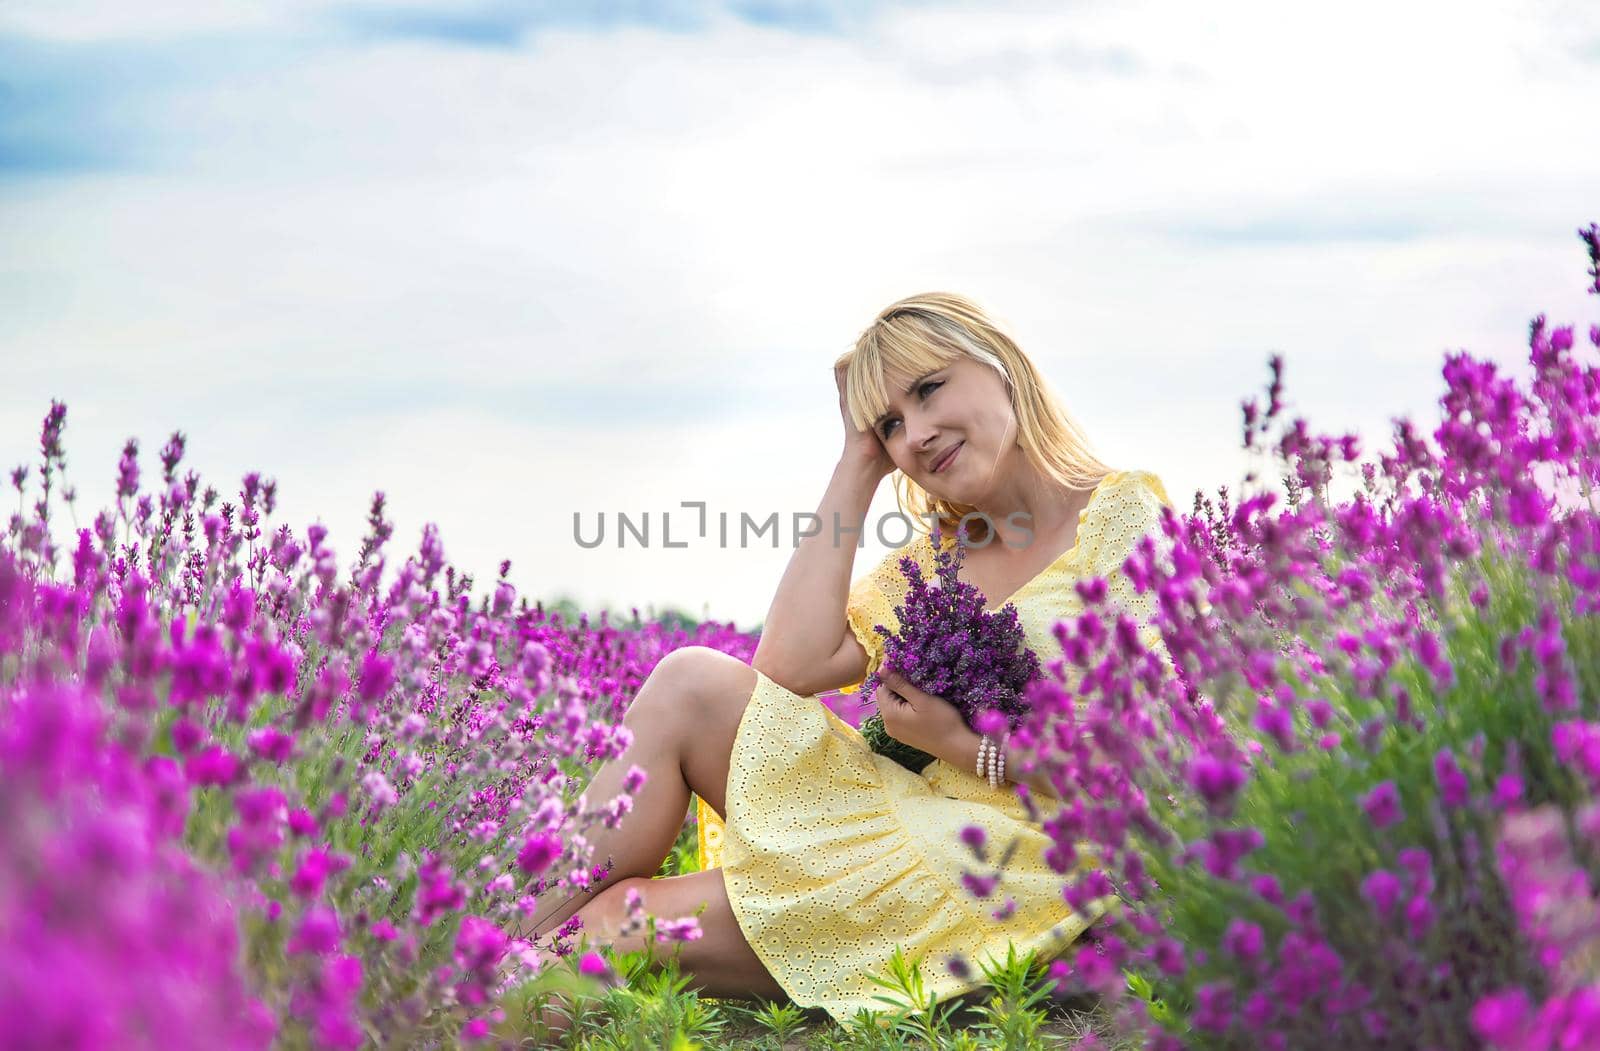 Beautiful woman in lavender field. Selective focus. Nature.